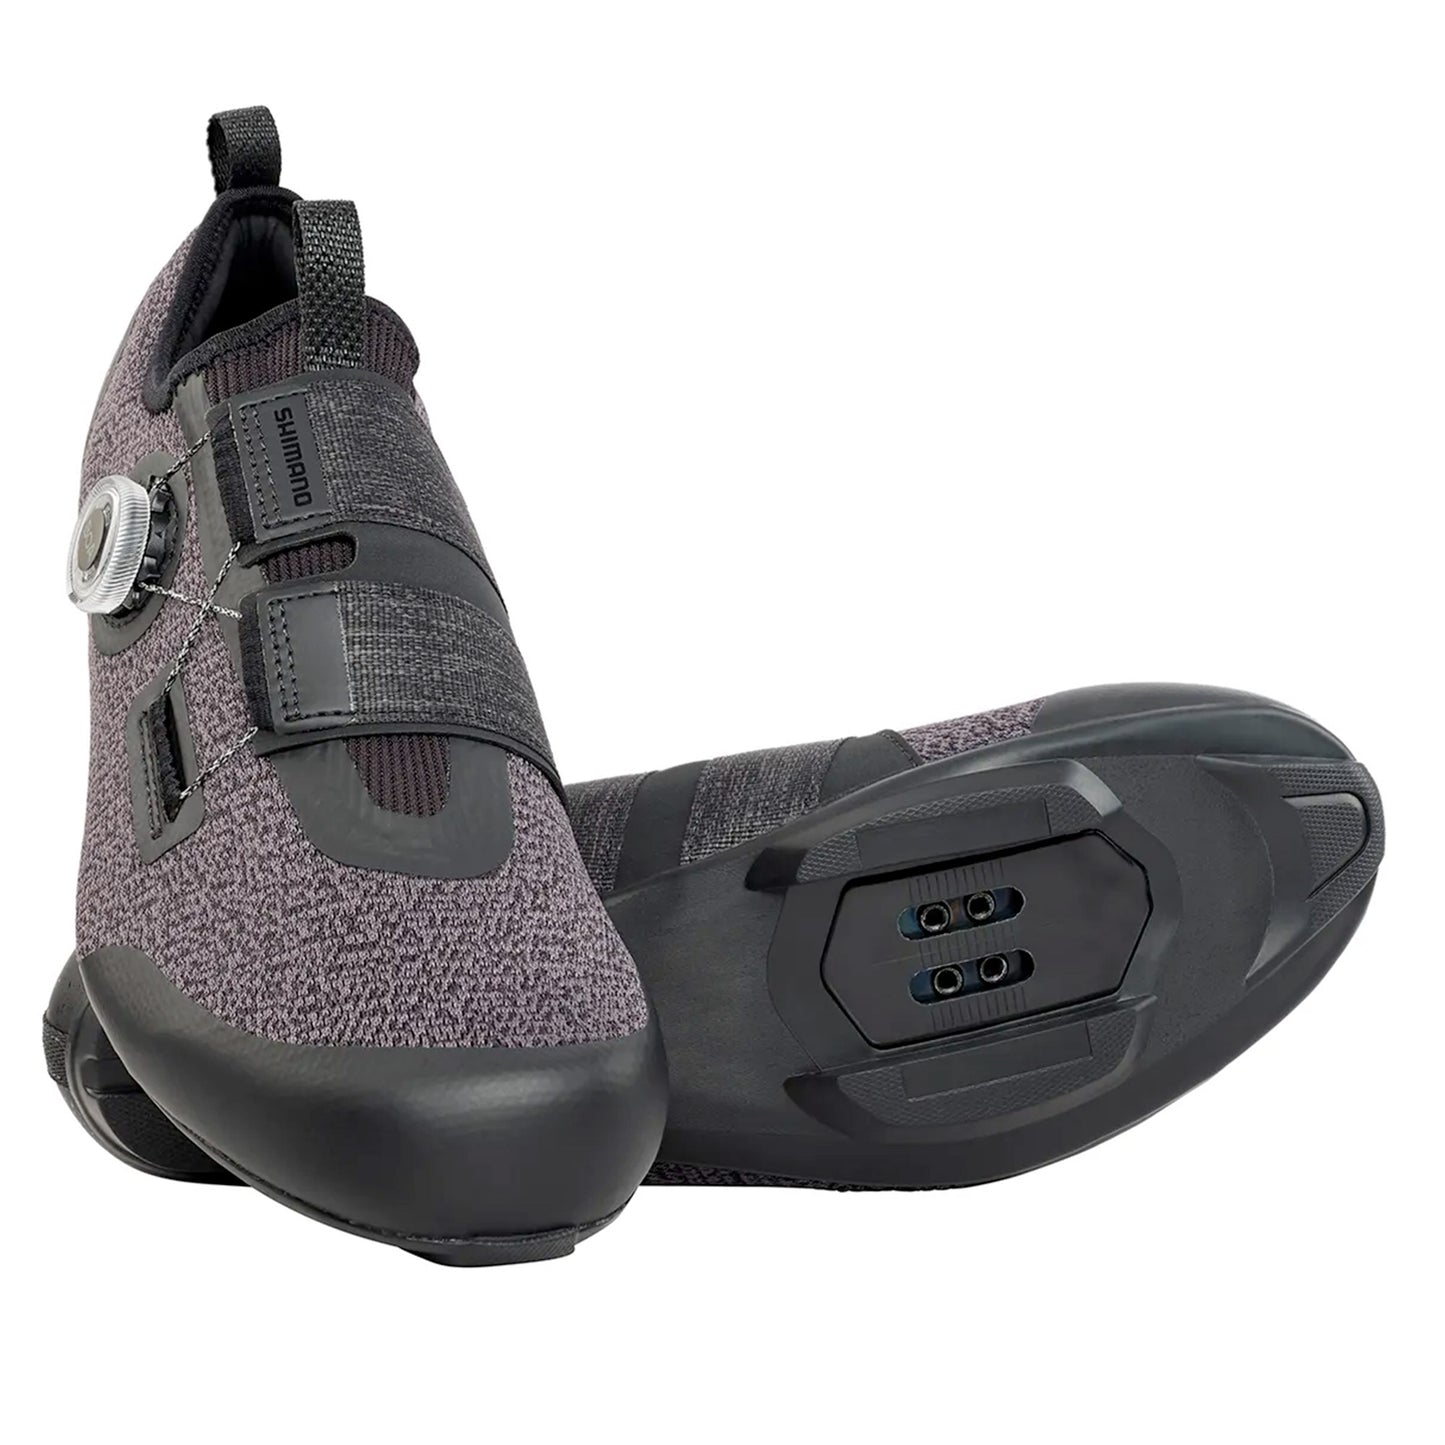 Shimano IC501 Unisex Indoor Cycling Spin Shoes, Black